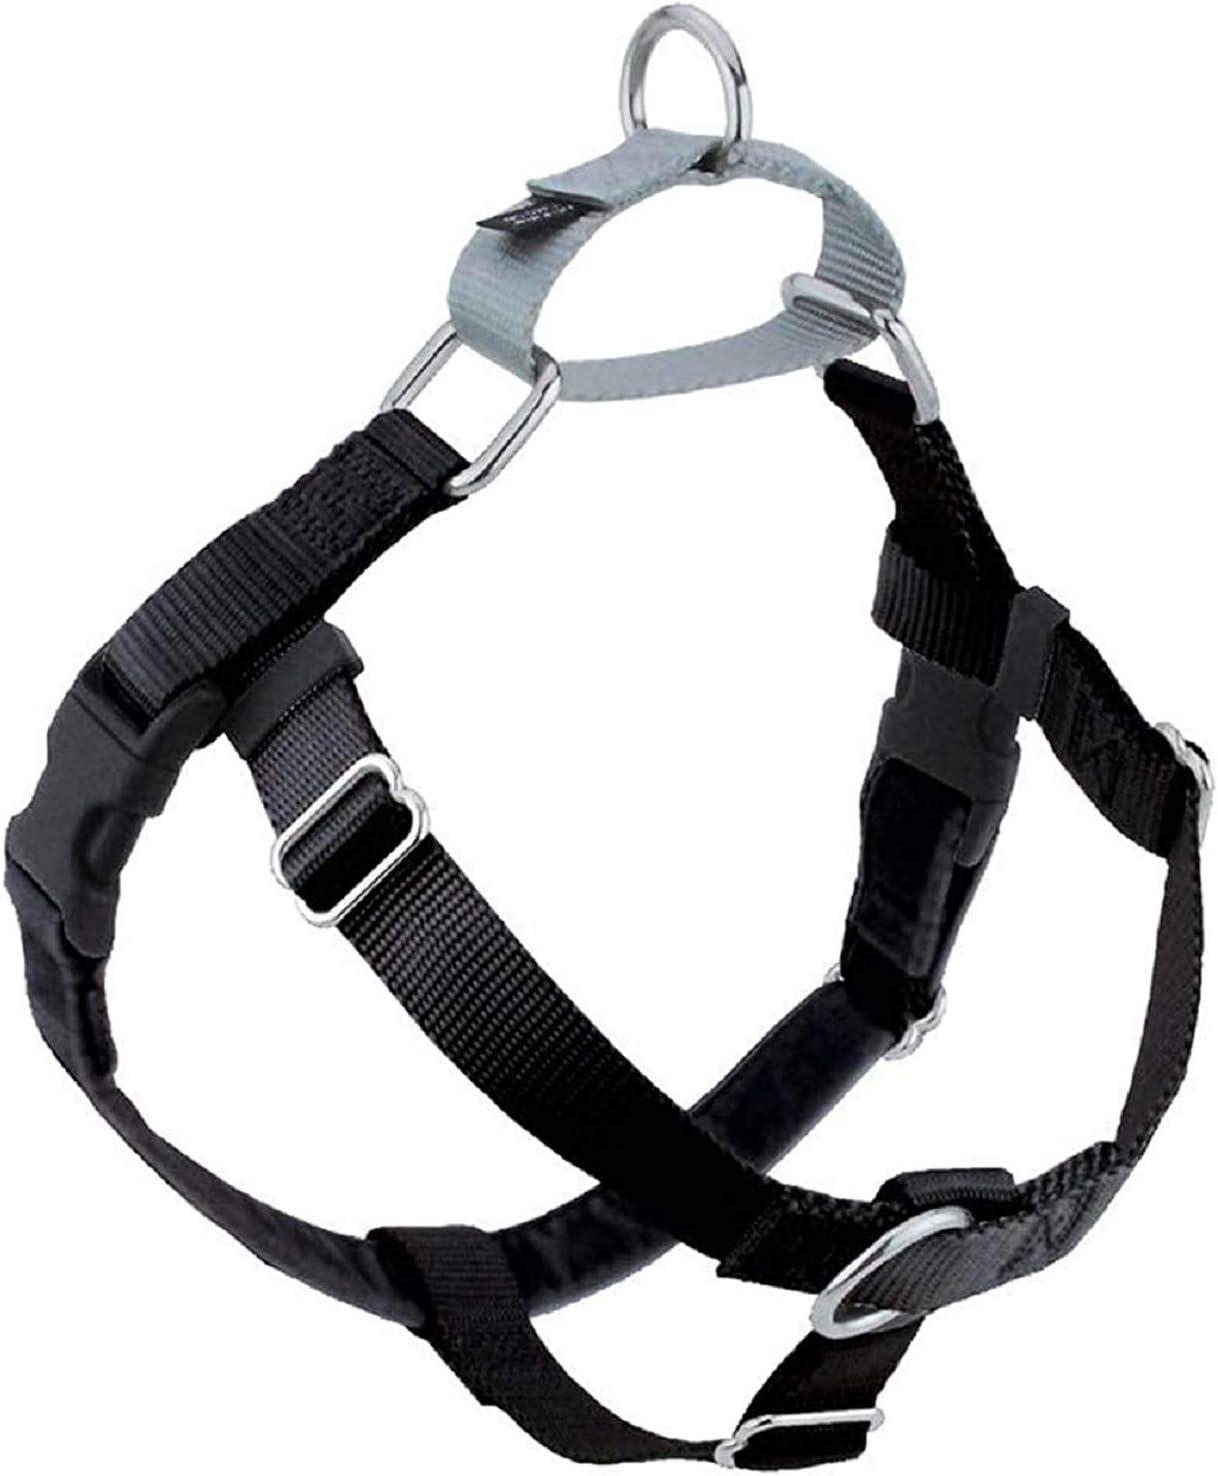 2 Hounds Design Gentle and Comfortable Harness